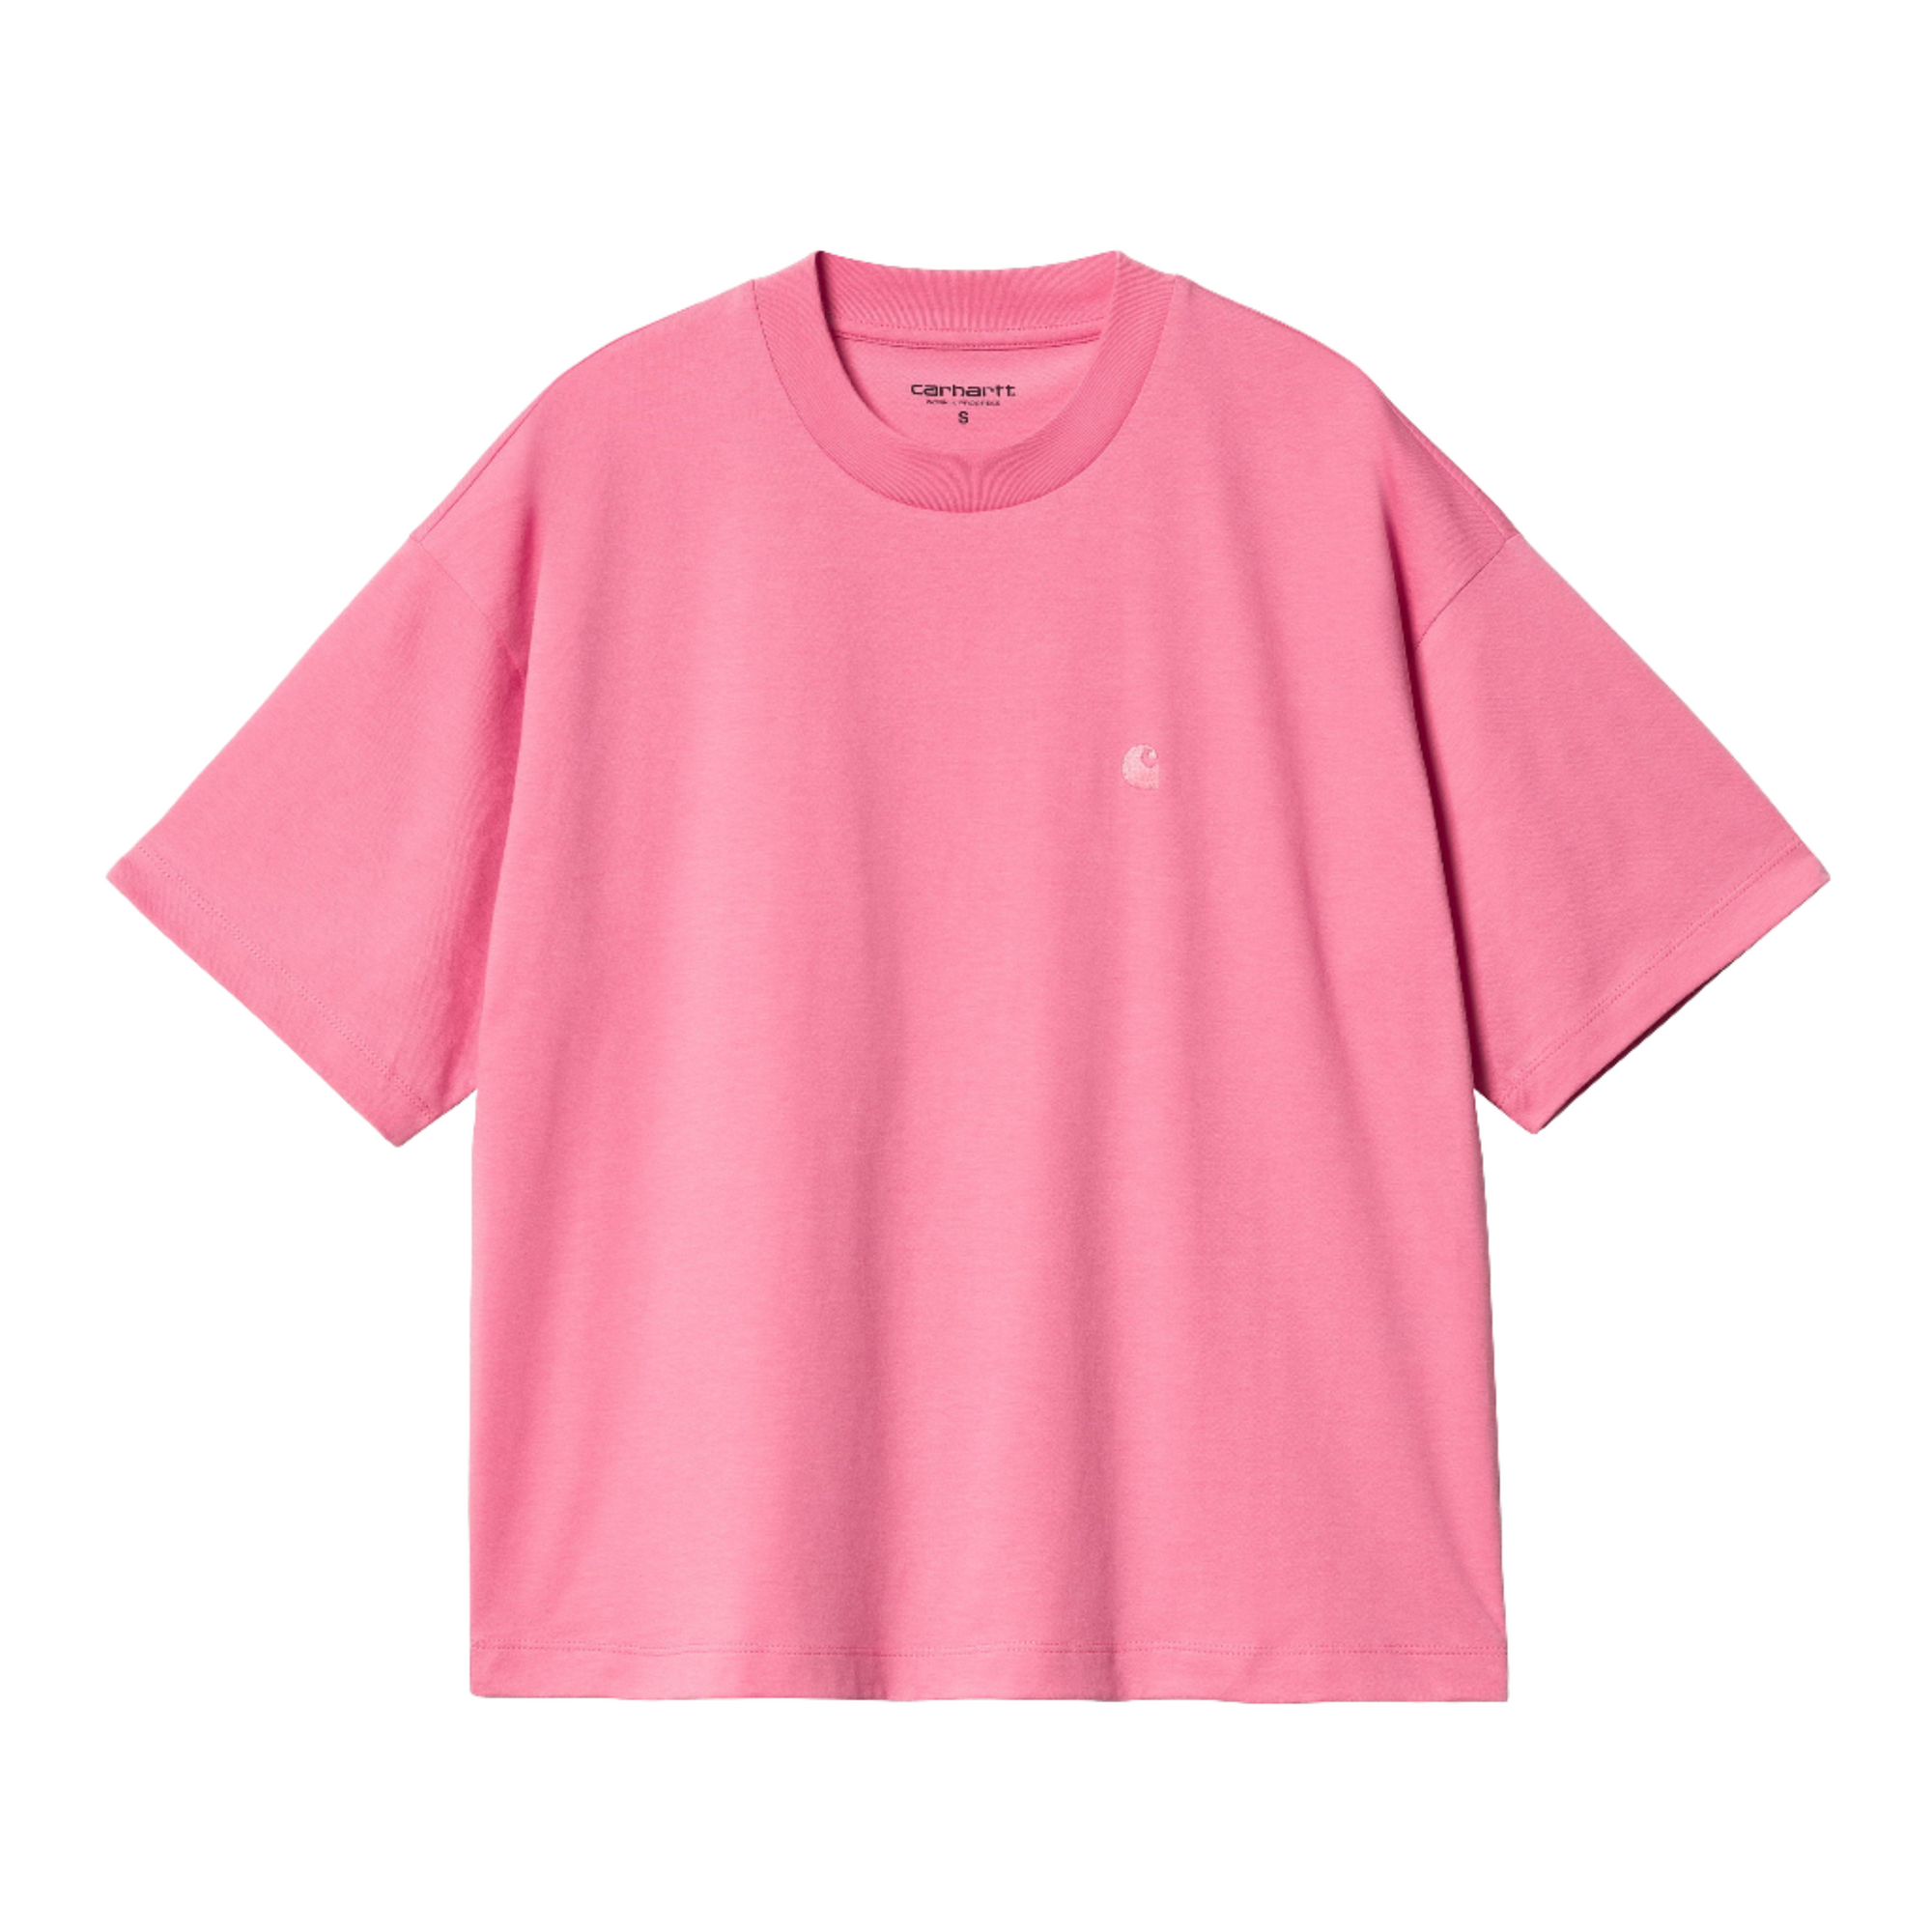 W' S/S CHESTER T-SHIRT / CARHARTT WIP / CHARM PINK